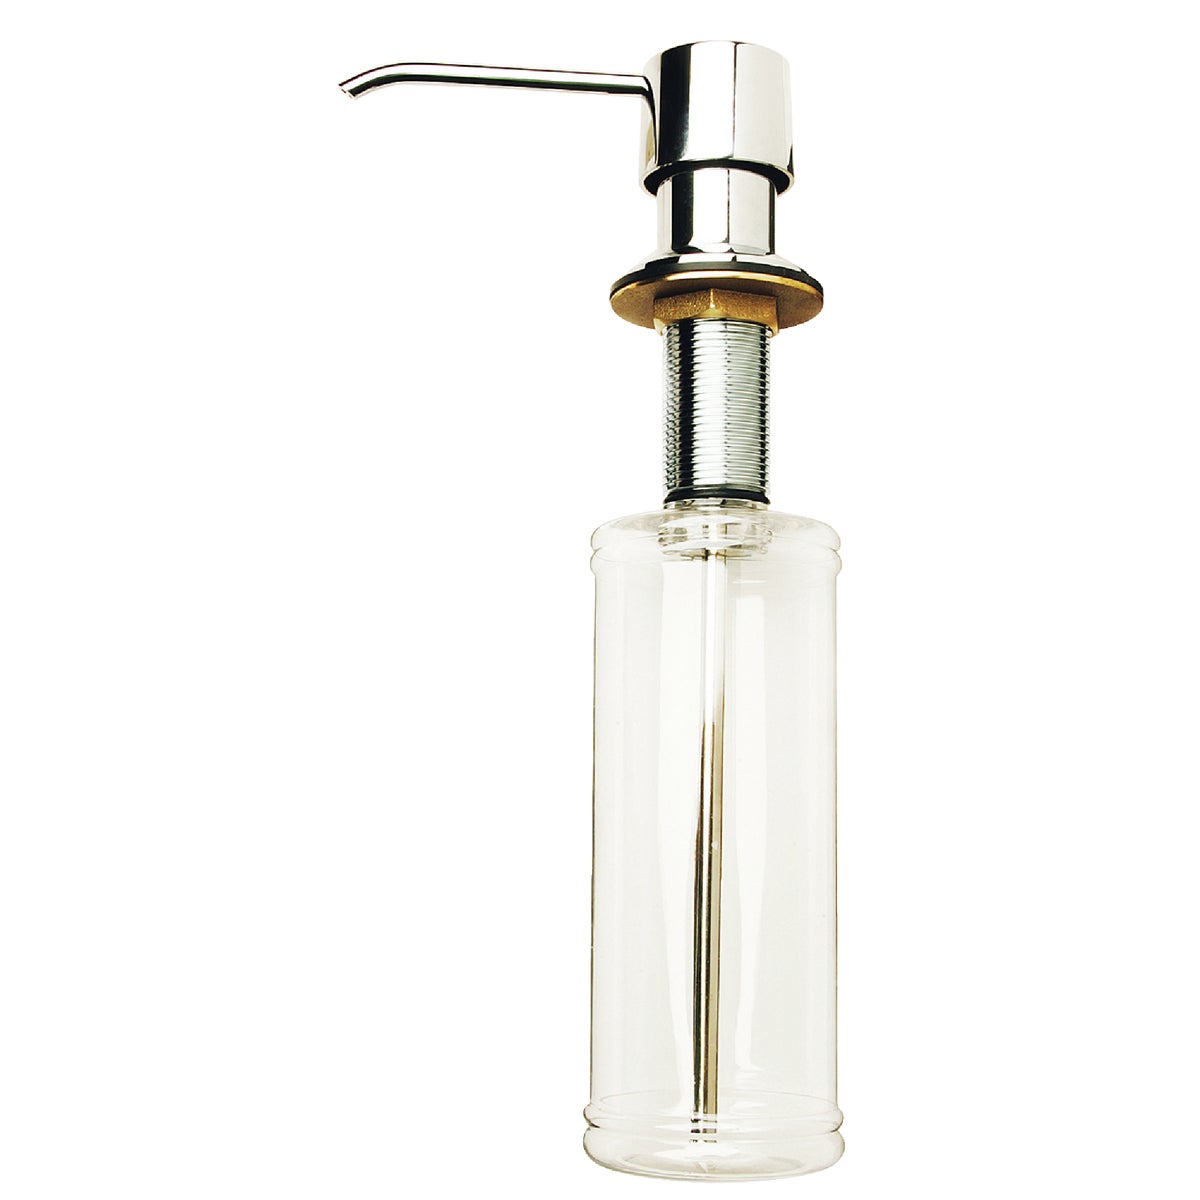 Do it Polished Chrome Clear Body Soap Dispenser